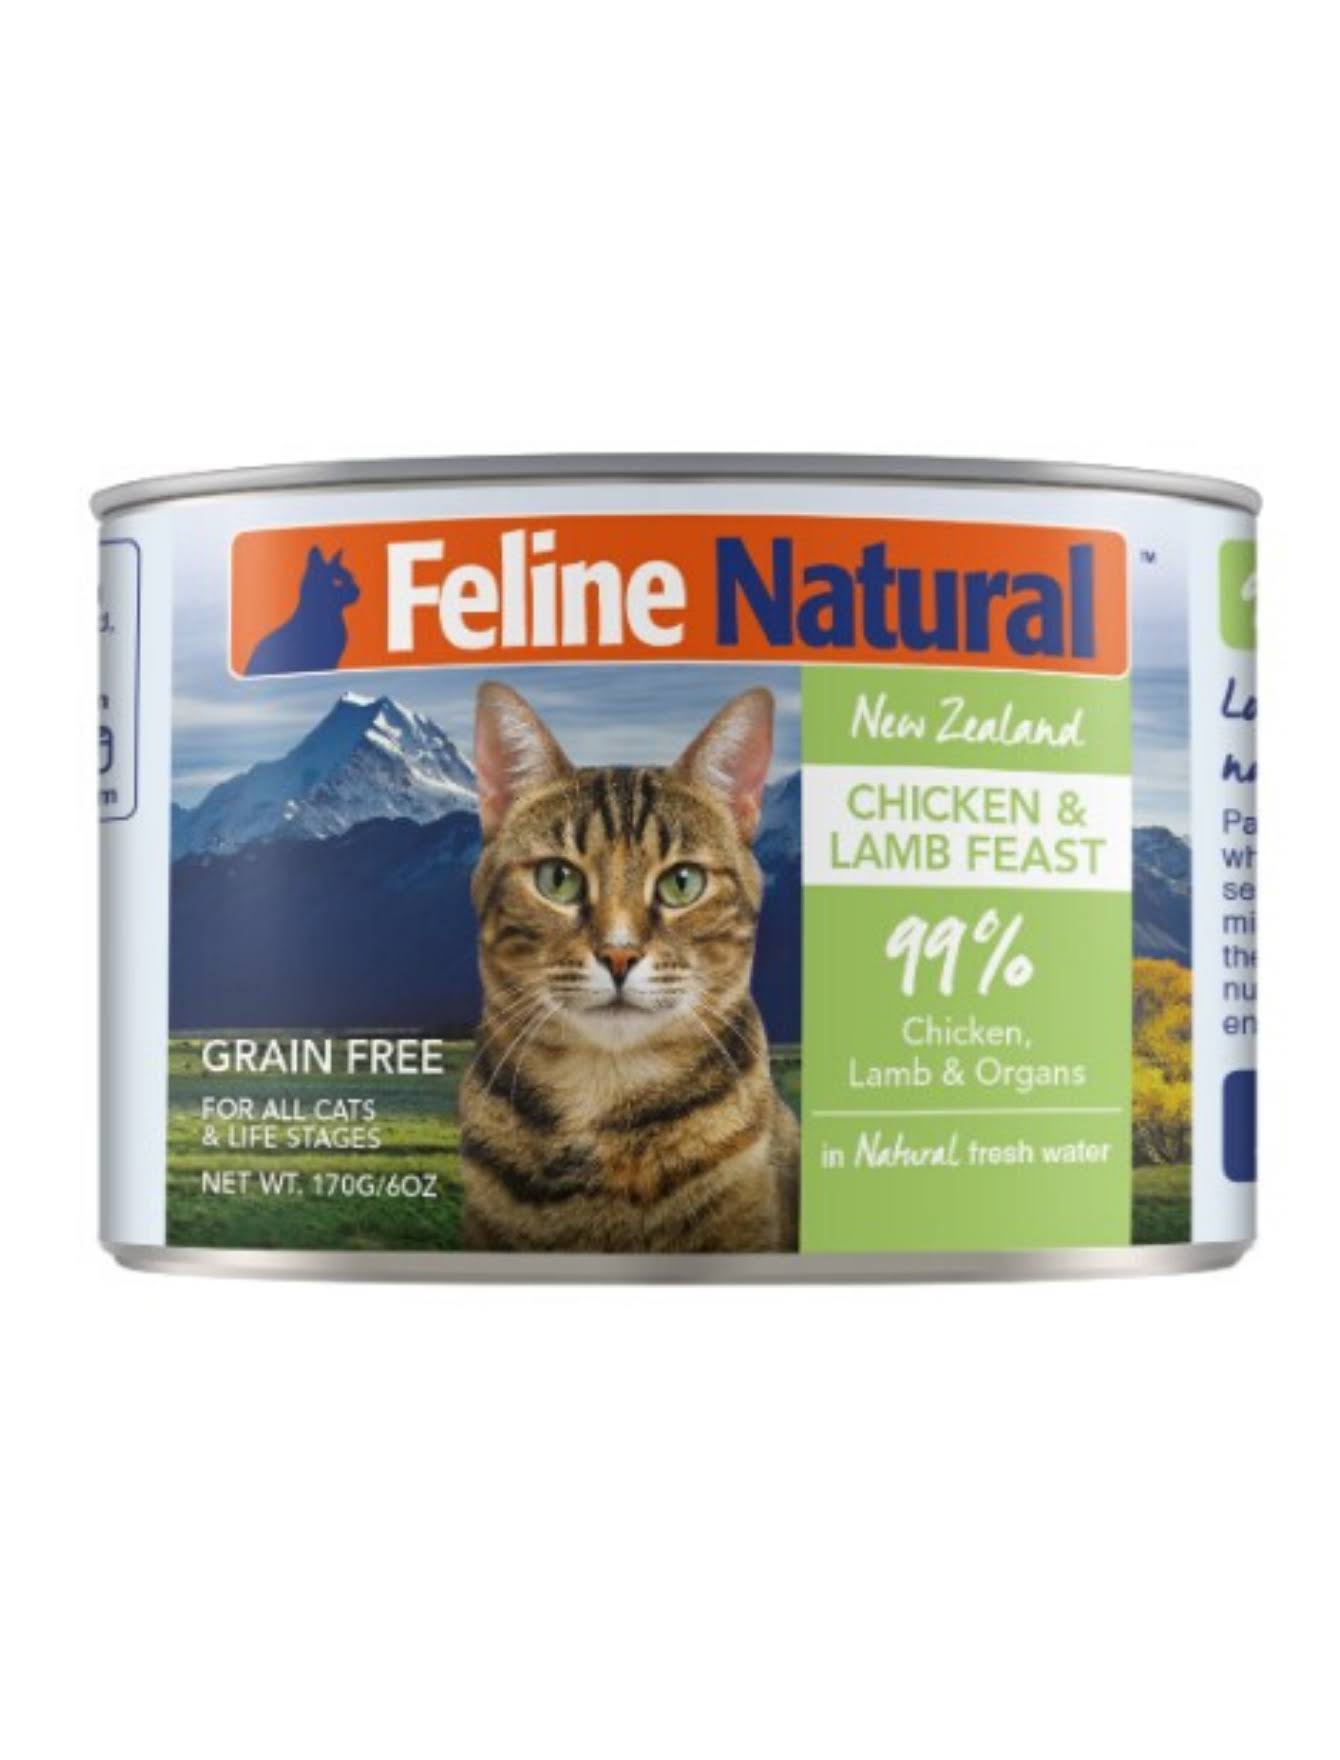 Feline Natural Canned Cat Food - Chicken & Lamb Feast